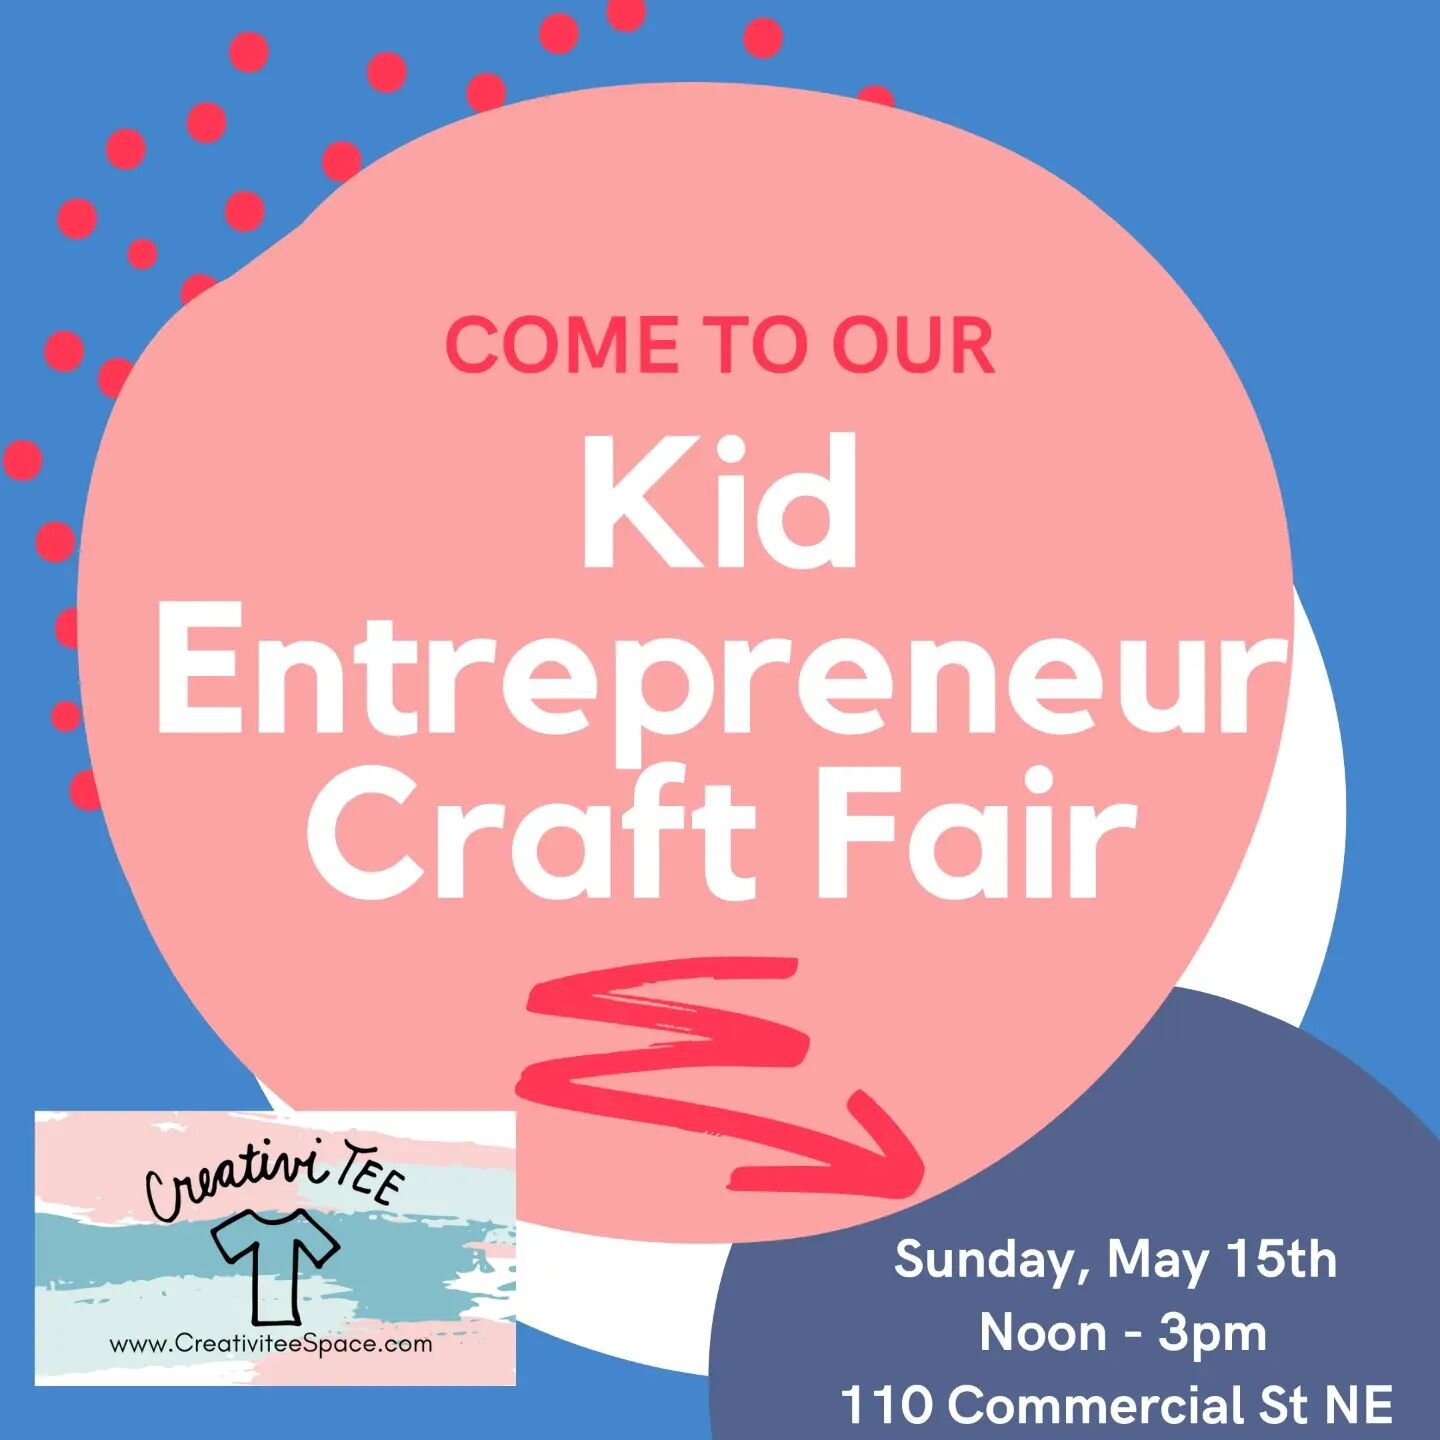 Come support some young entrepreneurs! THIS coming Sunday from noon to 3 pm, we have some amazing young makers and entrepreneurs who are going to be selling their wares. 
.
Each maker will have their own setup, so bring cash to purchase directly from